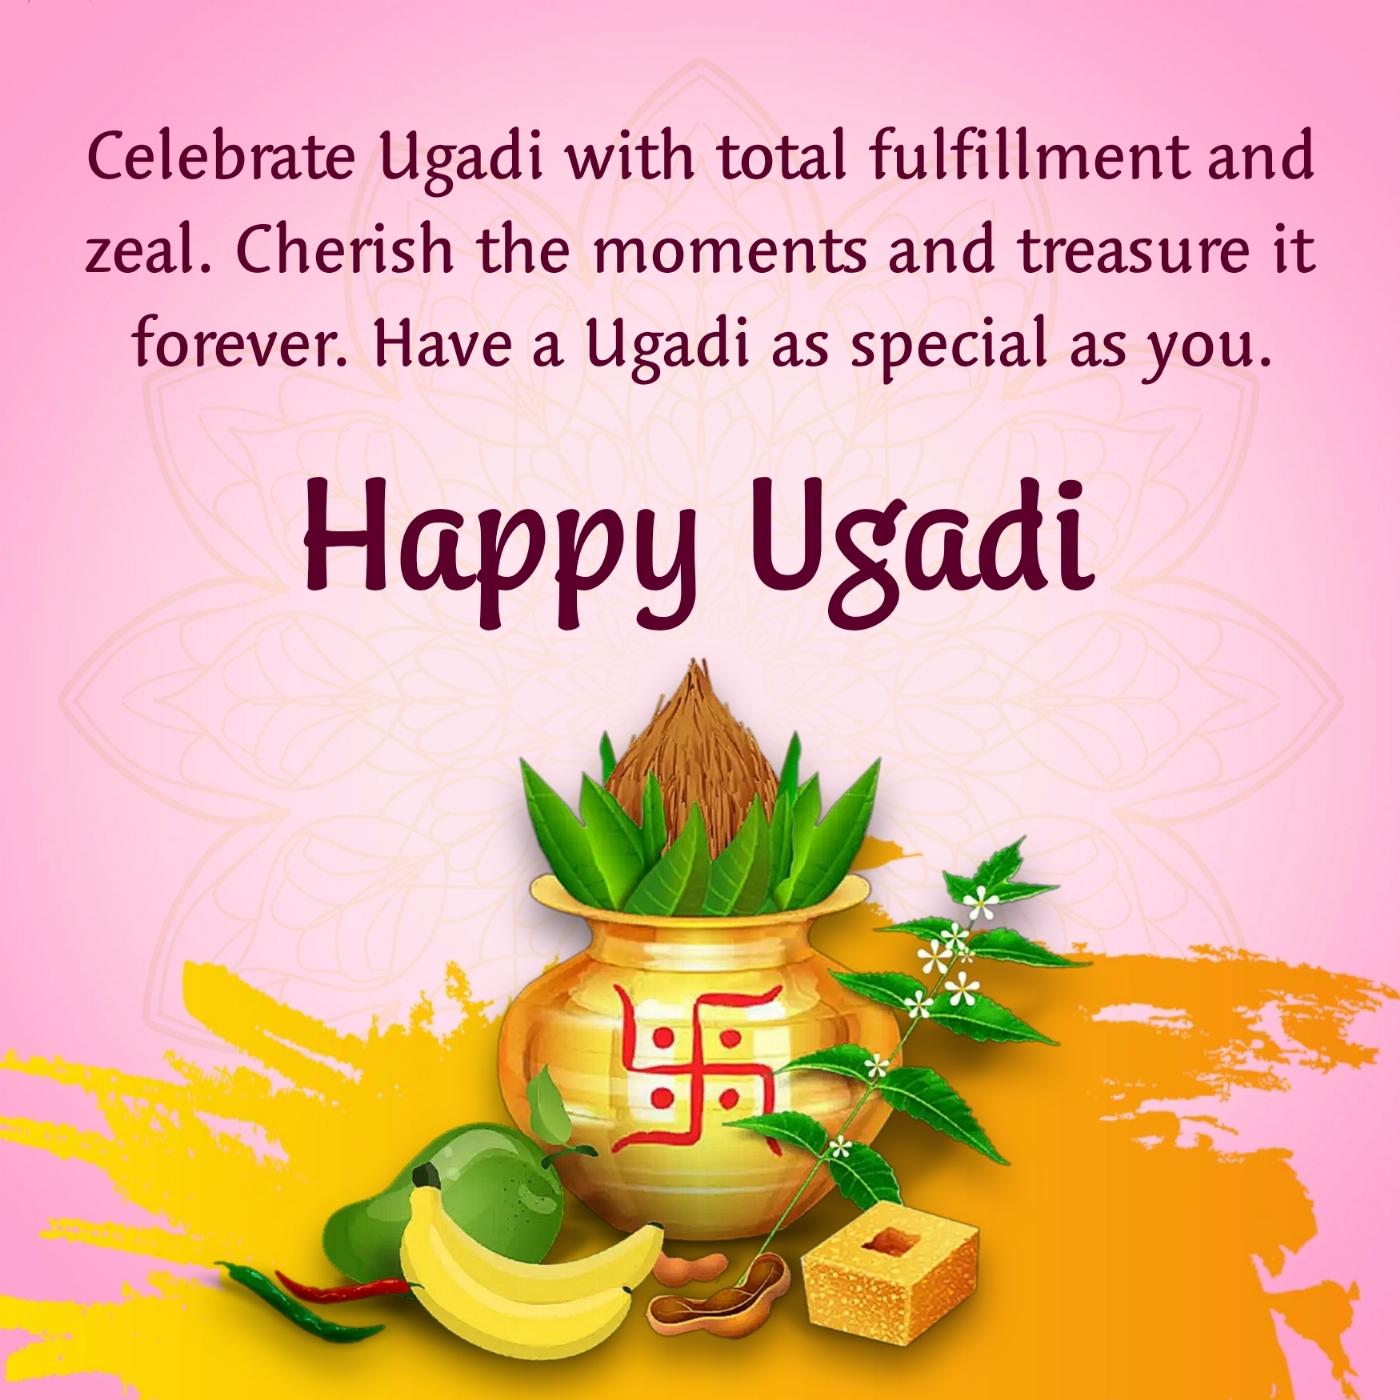 Celebrate Ugadi with total fulfillment and zeal